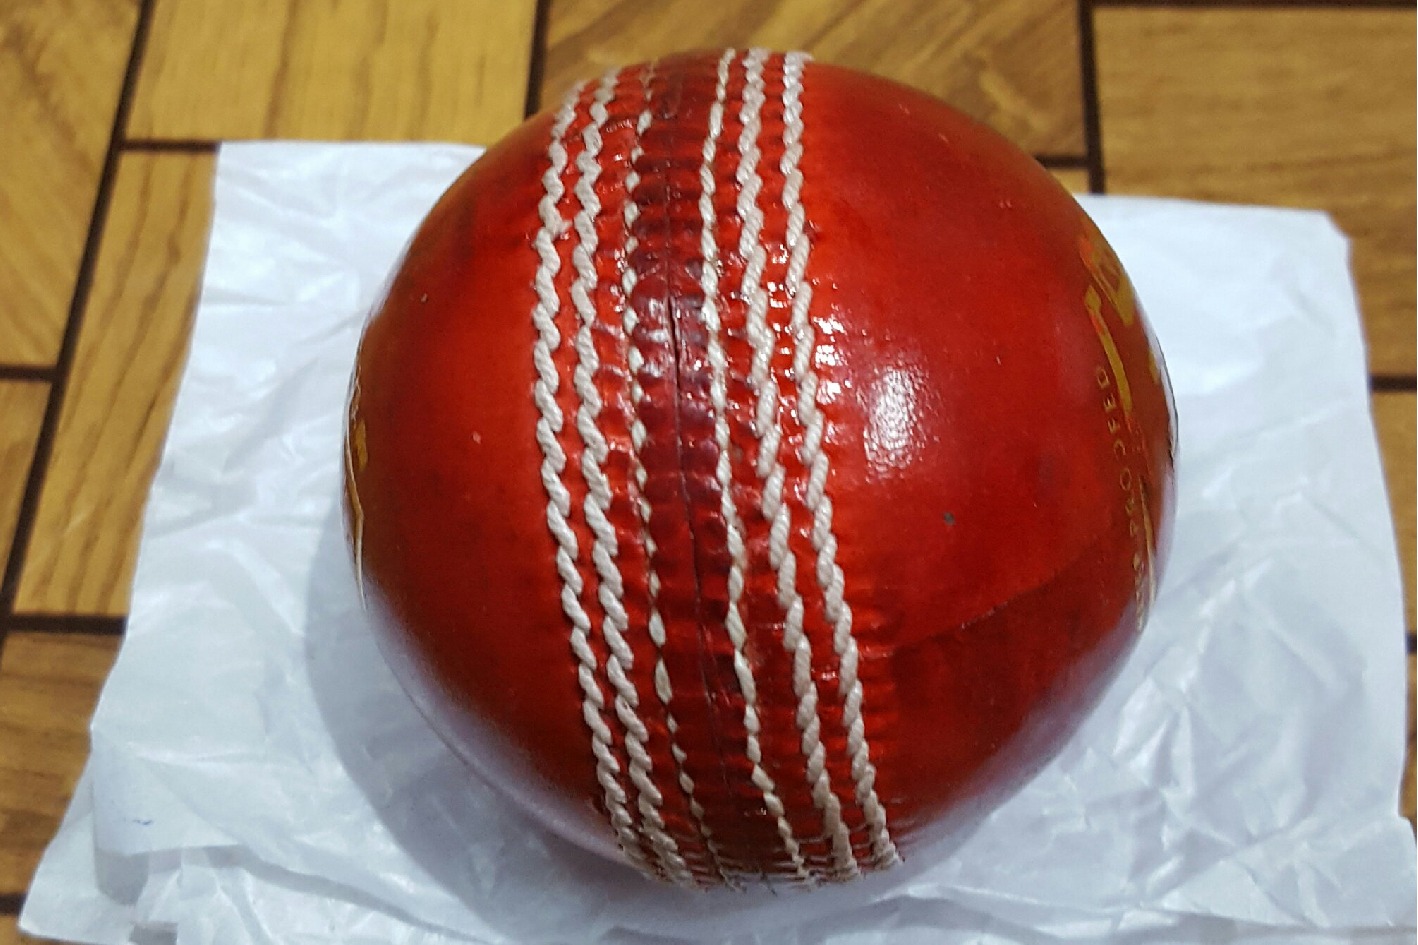 BCCI asks SG Company to review ball quality after players complaints 